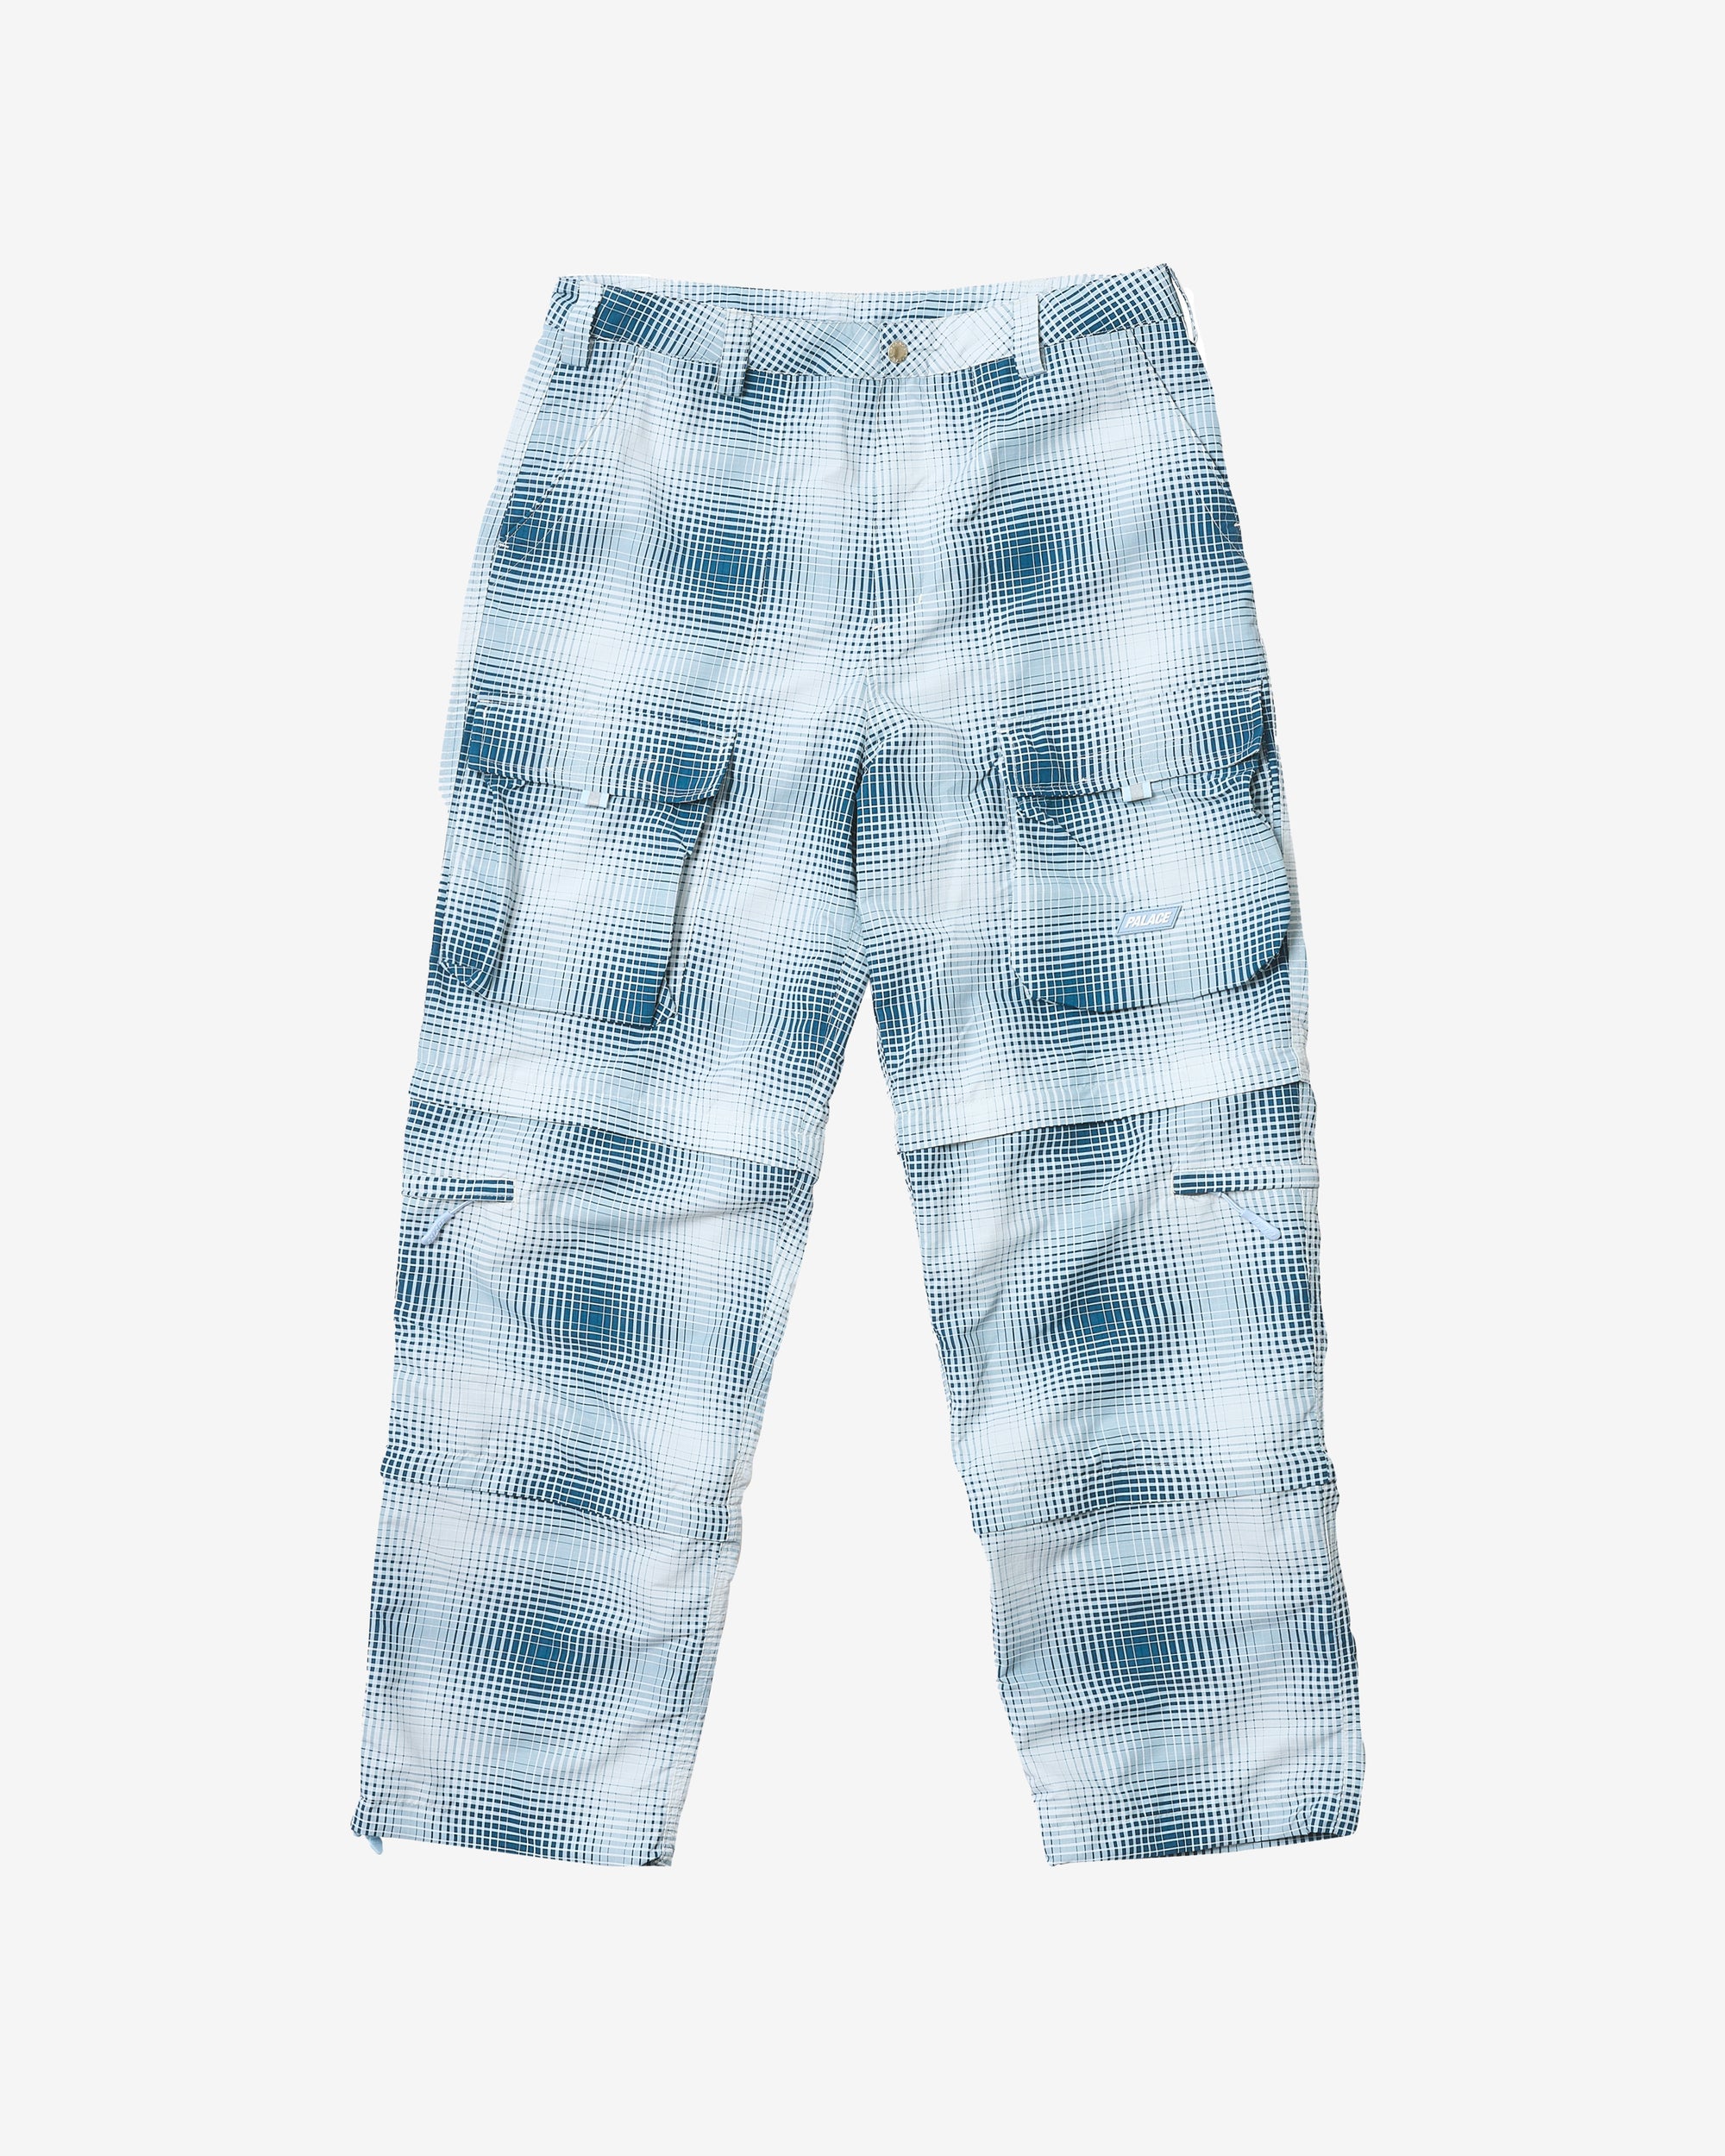 Palace - Men's Bare Levels Trouser - (Check) view 1